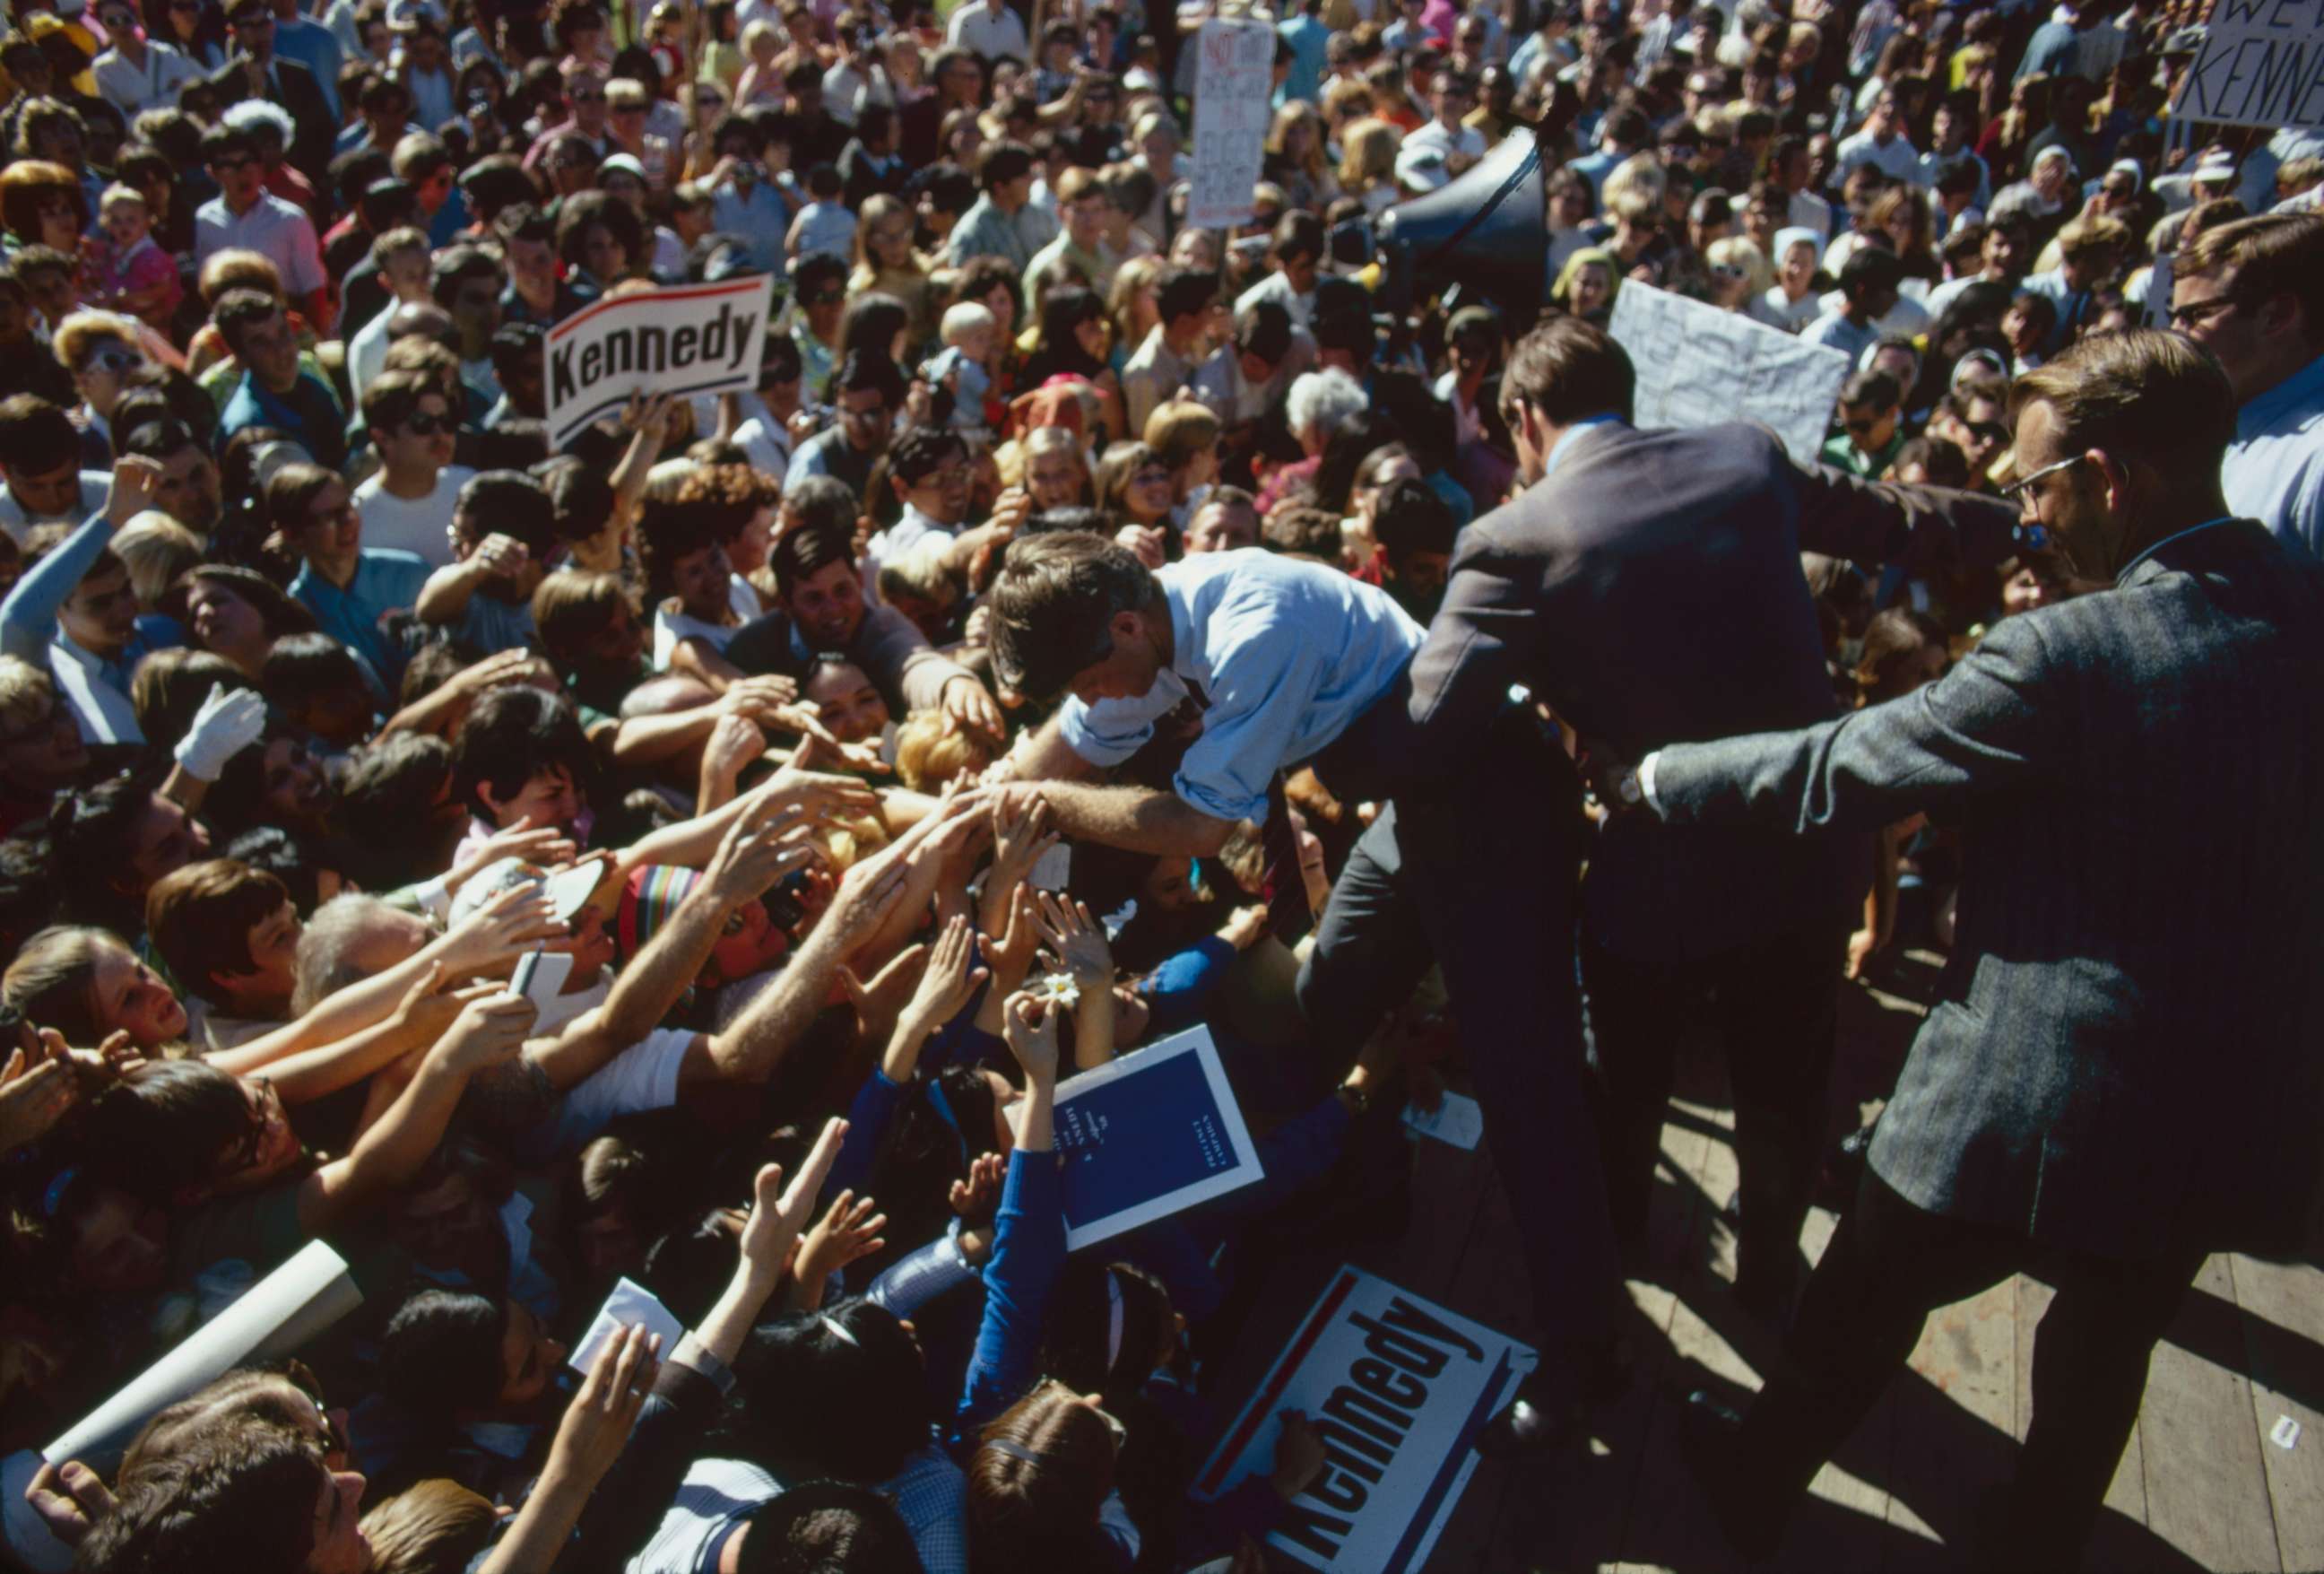 PHOTO: Senator Robert F. Kennedy shakes hands with crowd while campaigning in Oregon, June 1968.